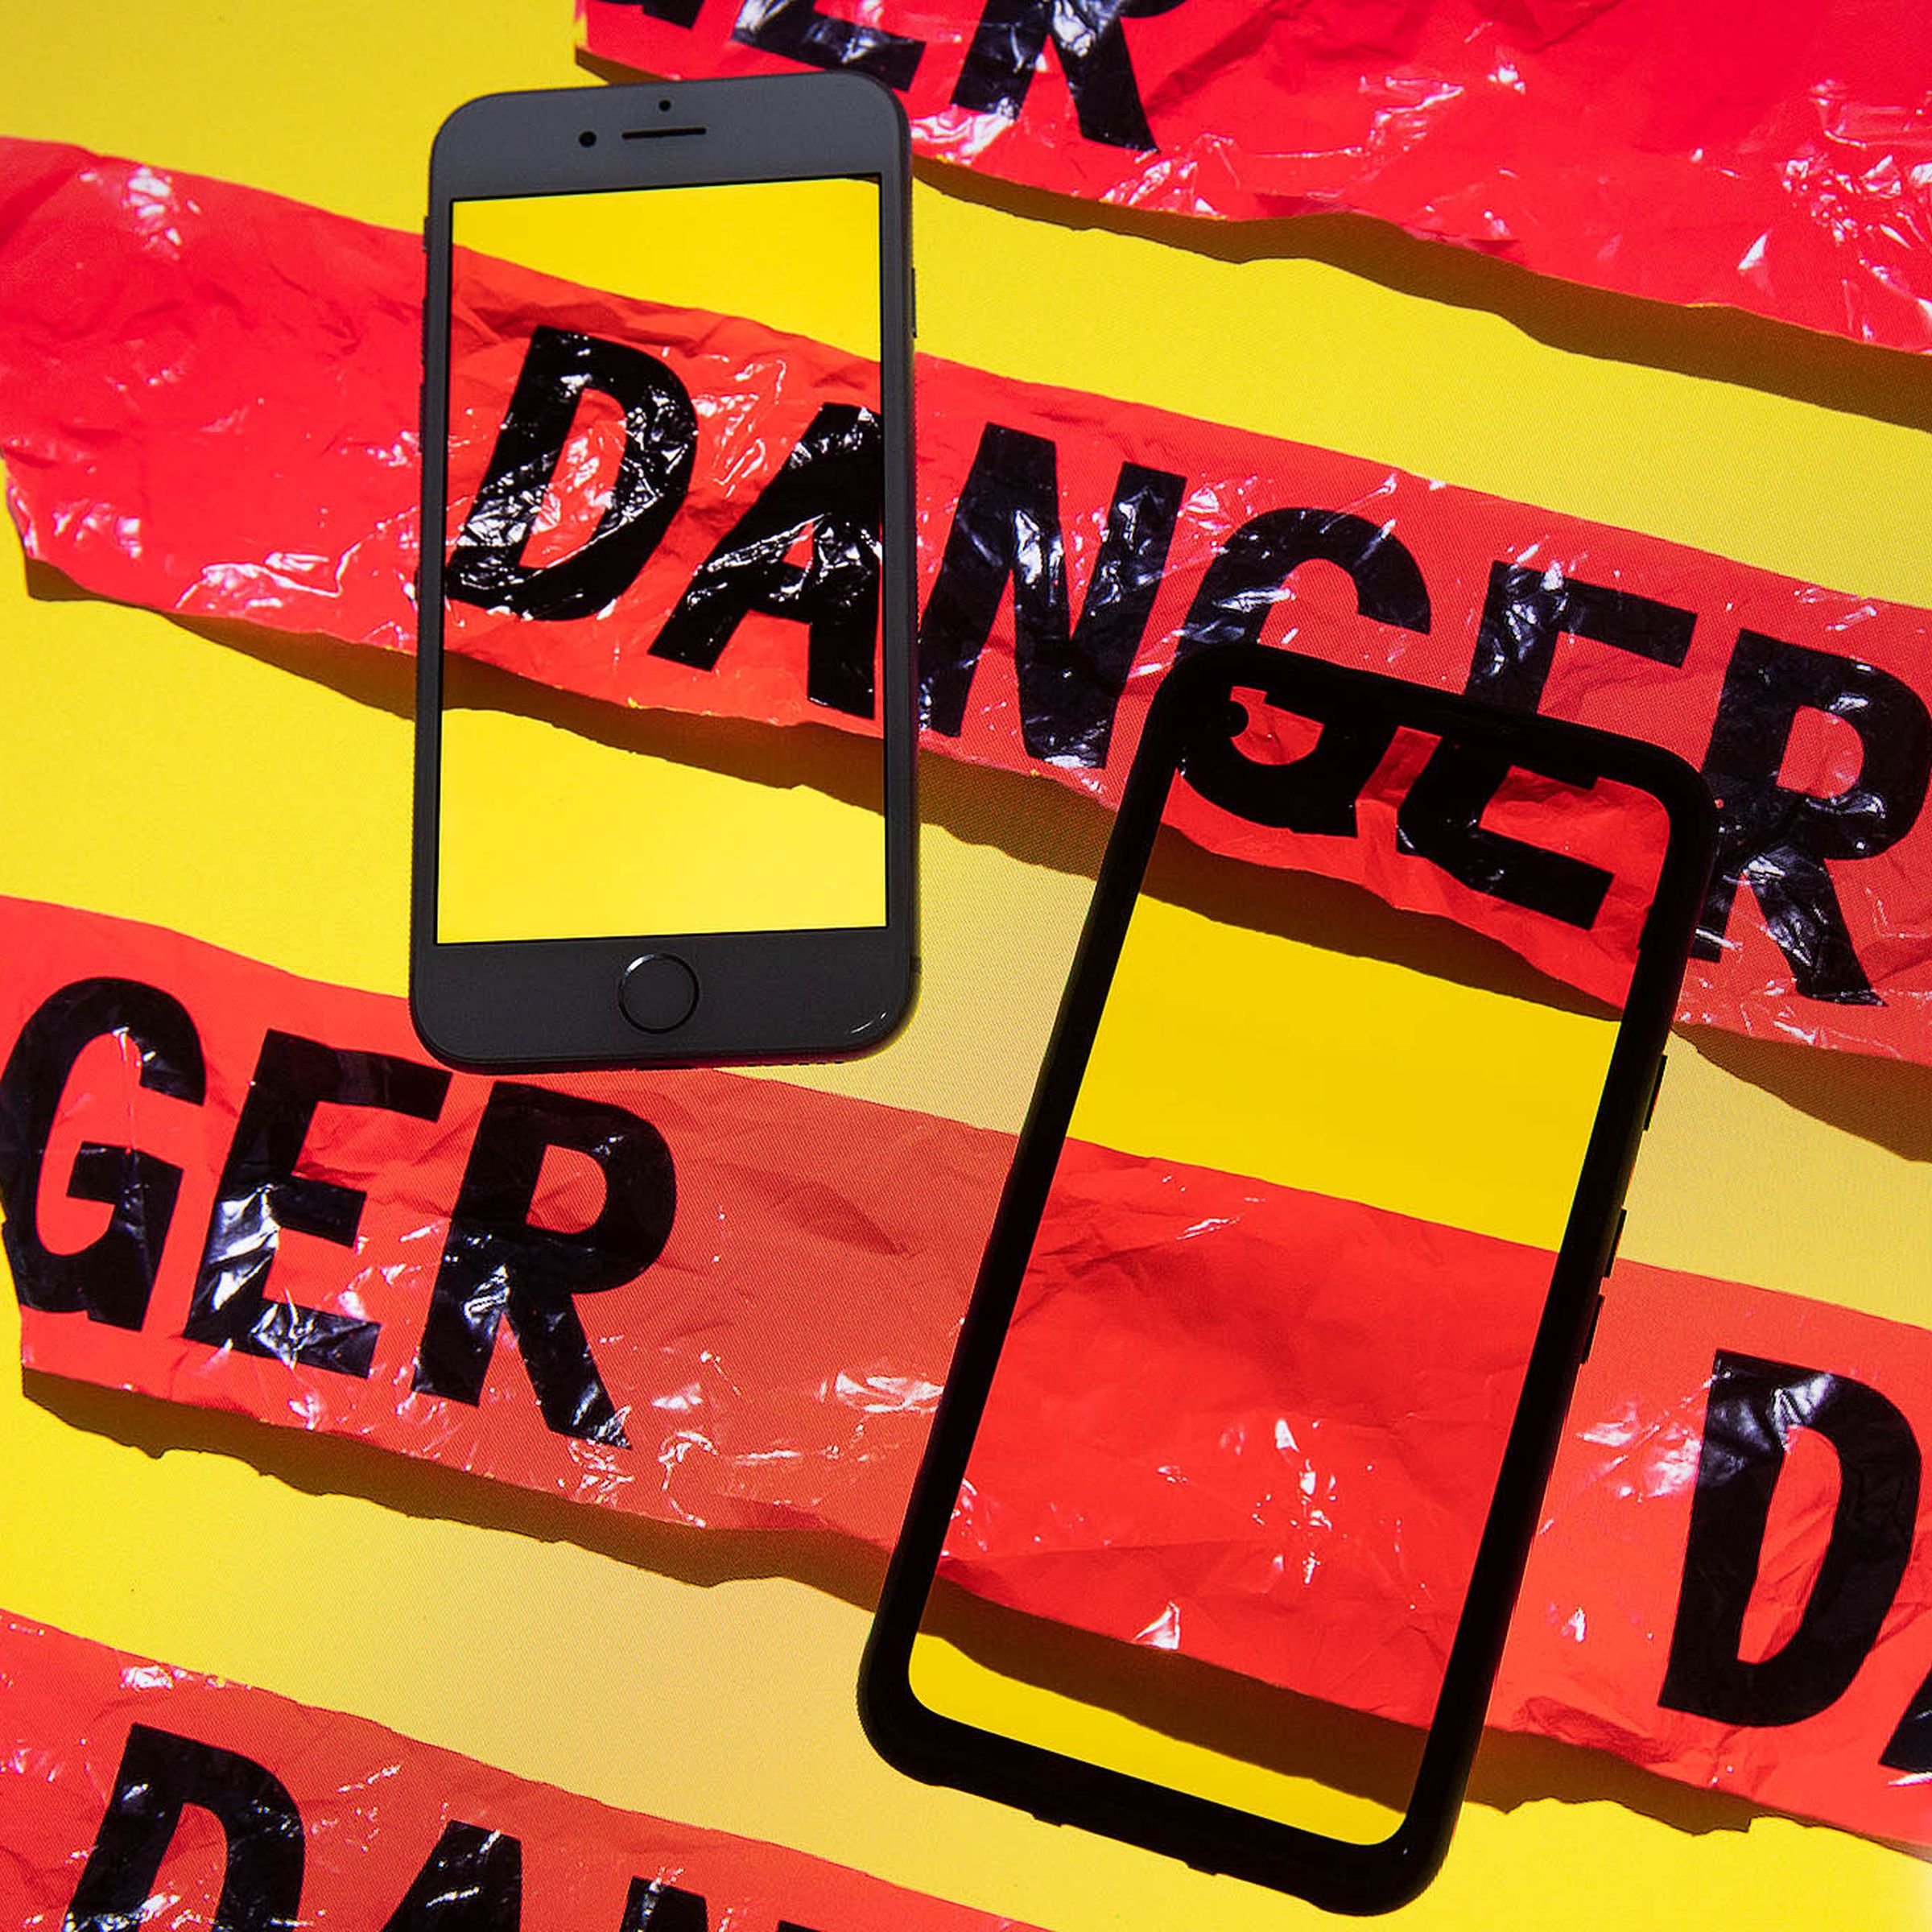 Illustration of two smartphones sitting on a yellow background with red tape across them that reads “DANGER”